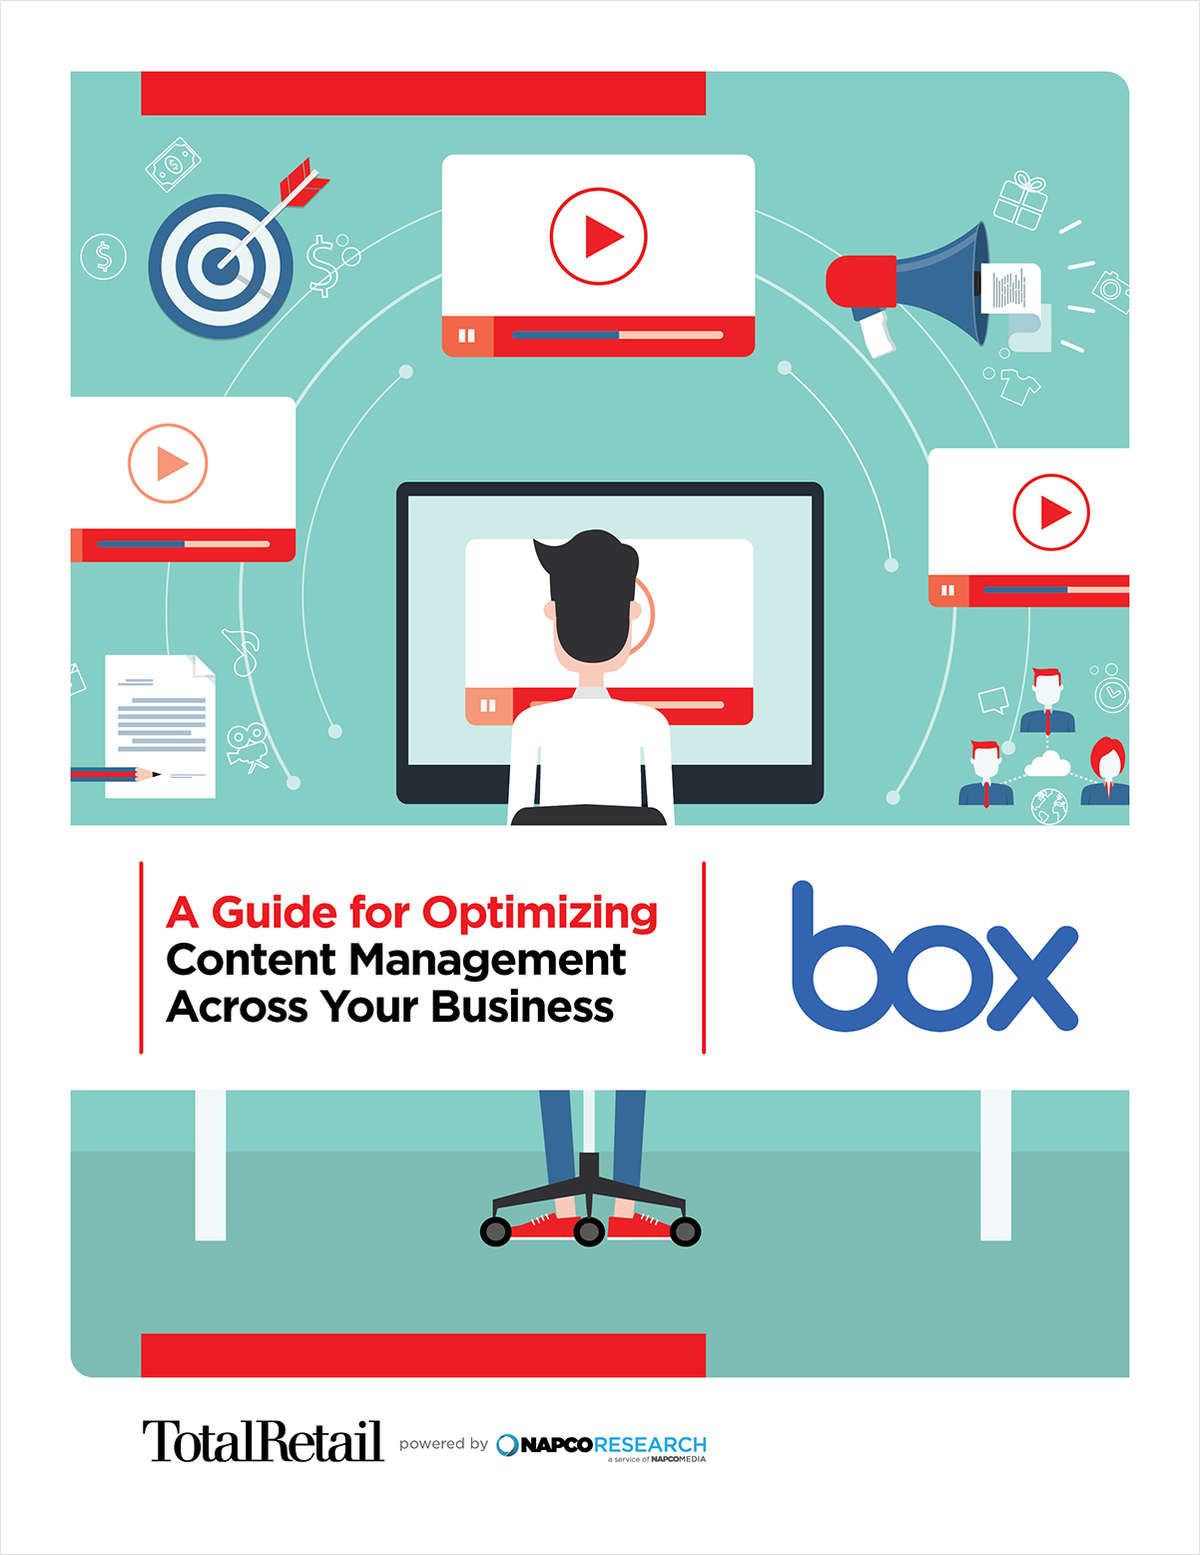 A Guide for Optimizing Content Management Across Your Business